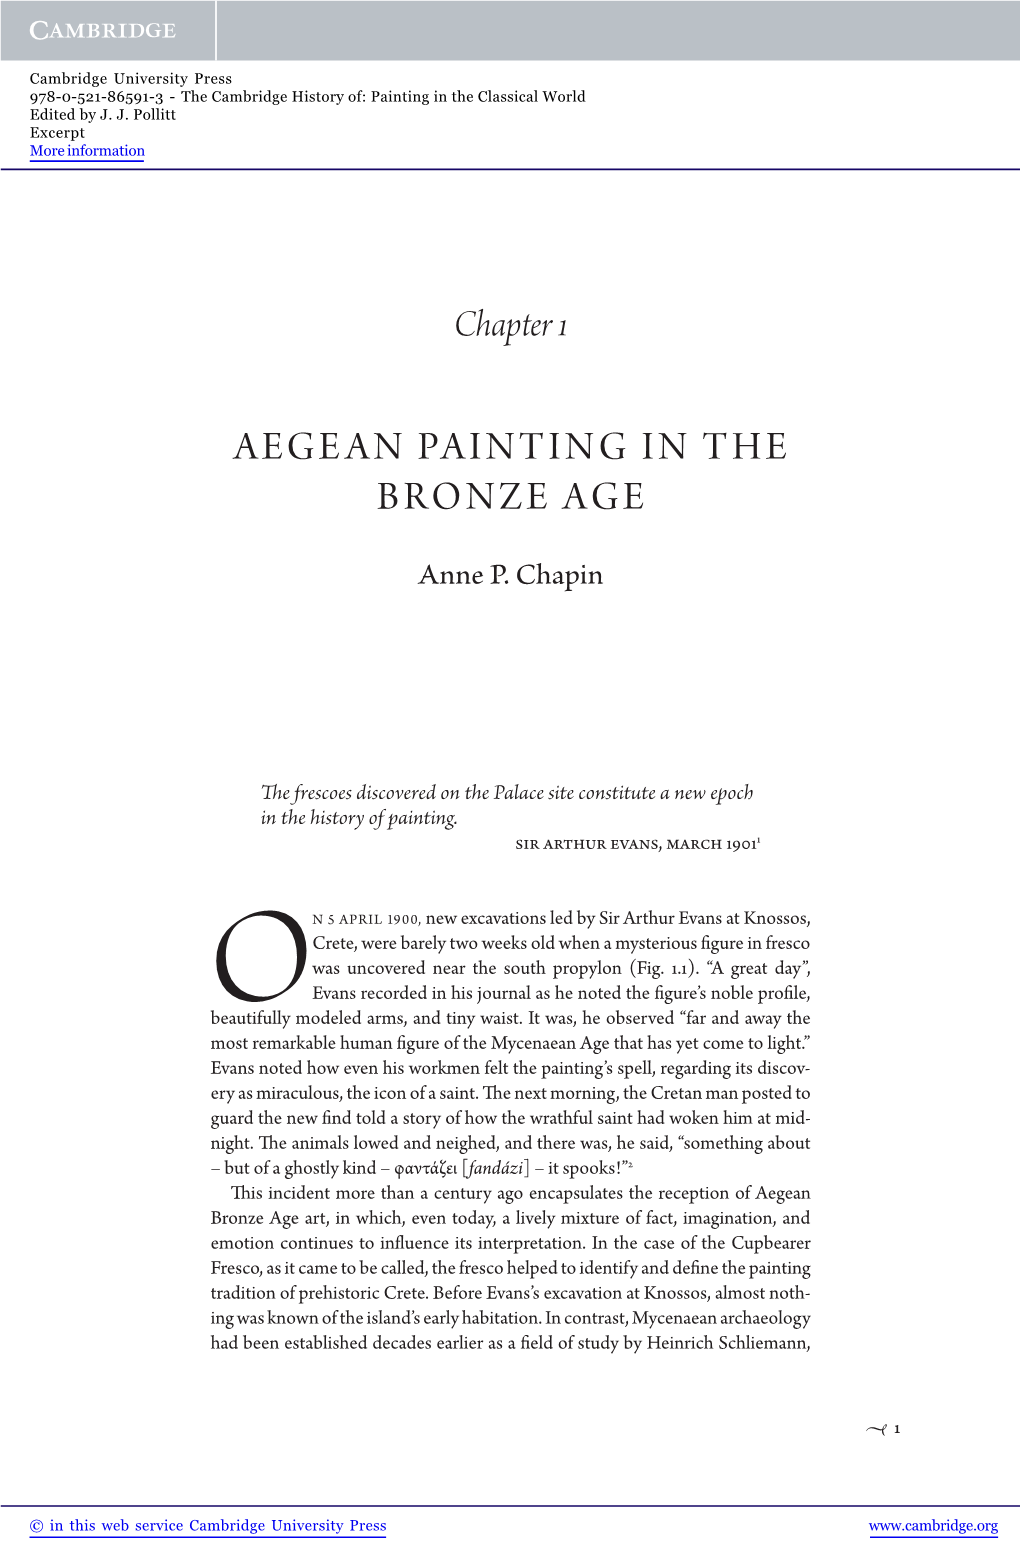 Aegean Painting in the Bronze Age